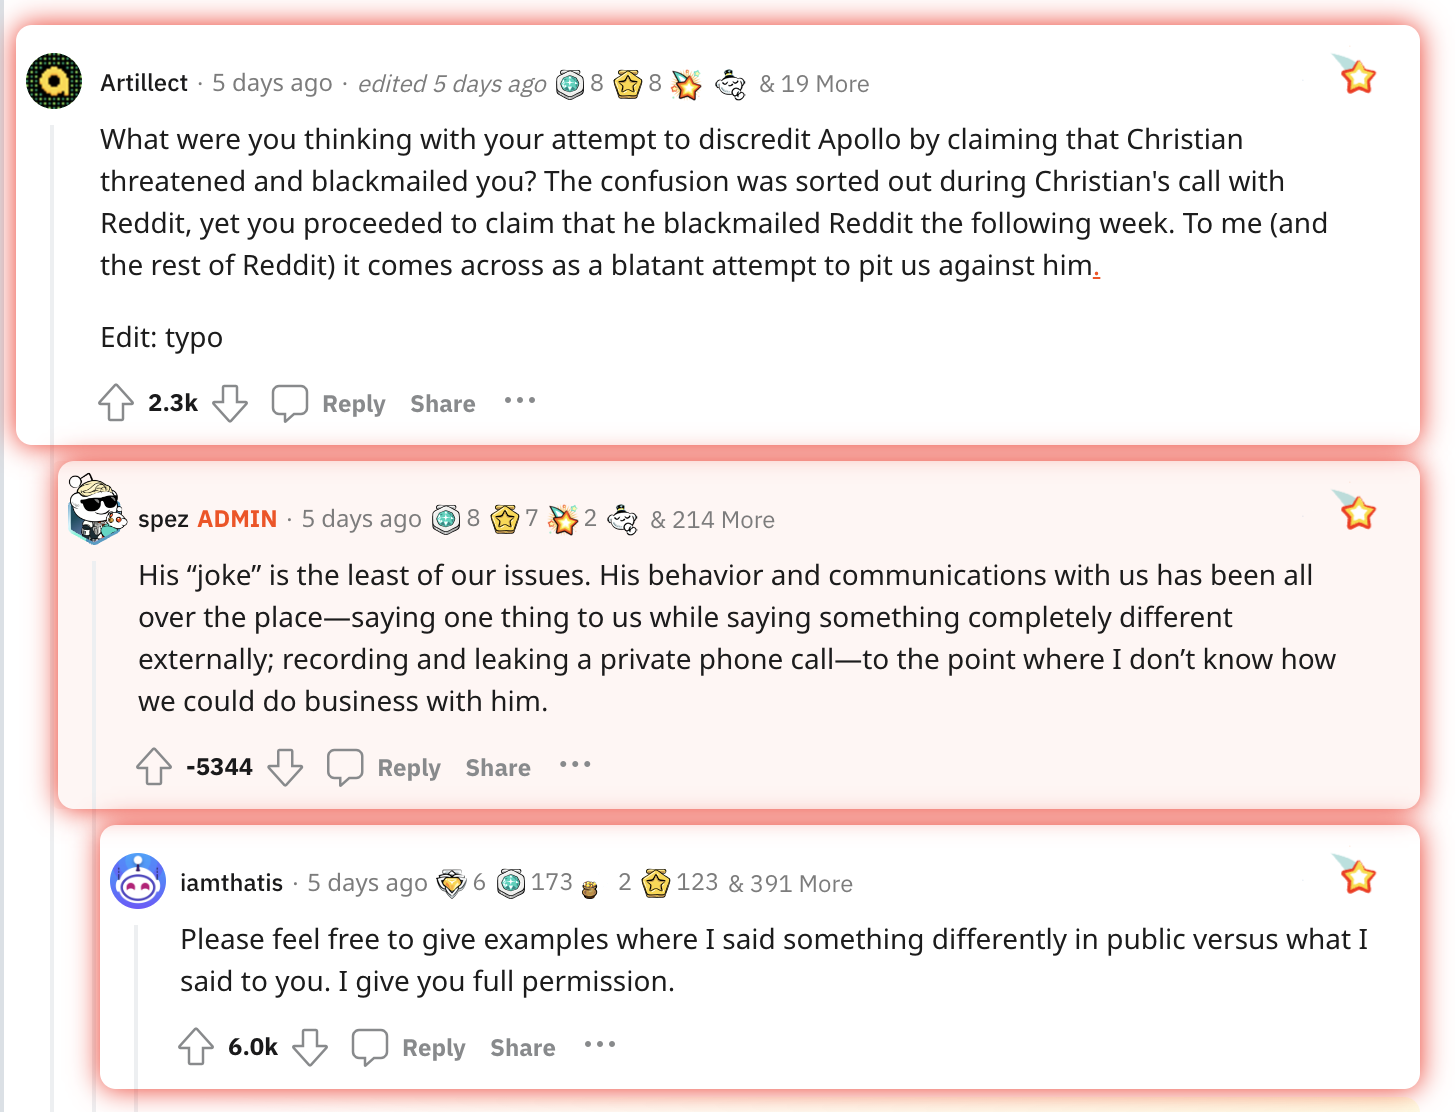 Popular Reddit communities support these app developers in an ongoing protest